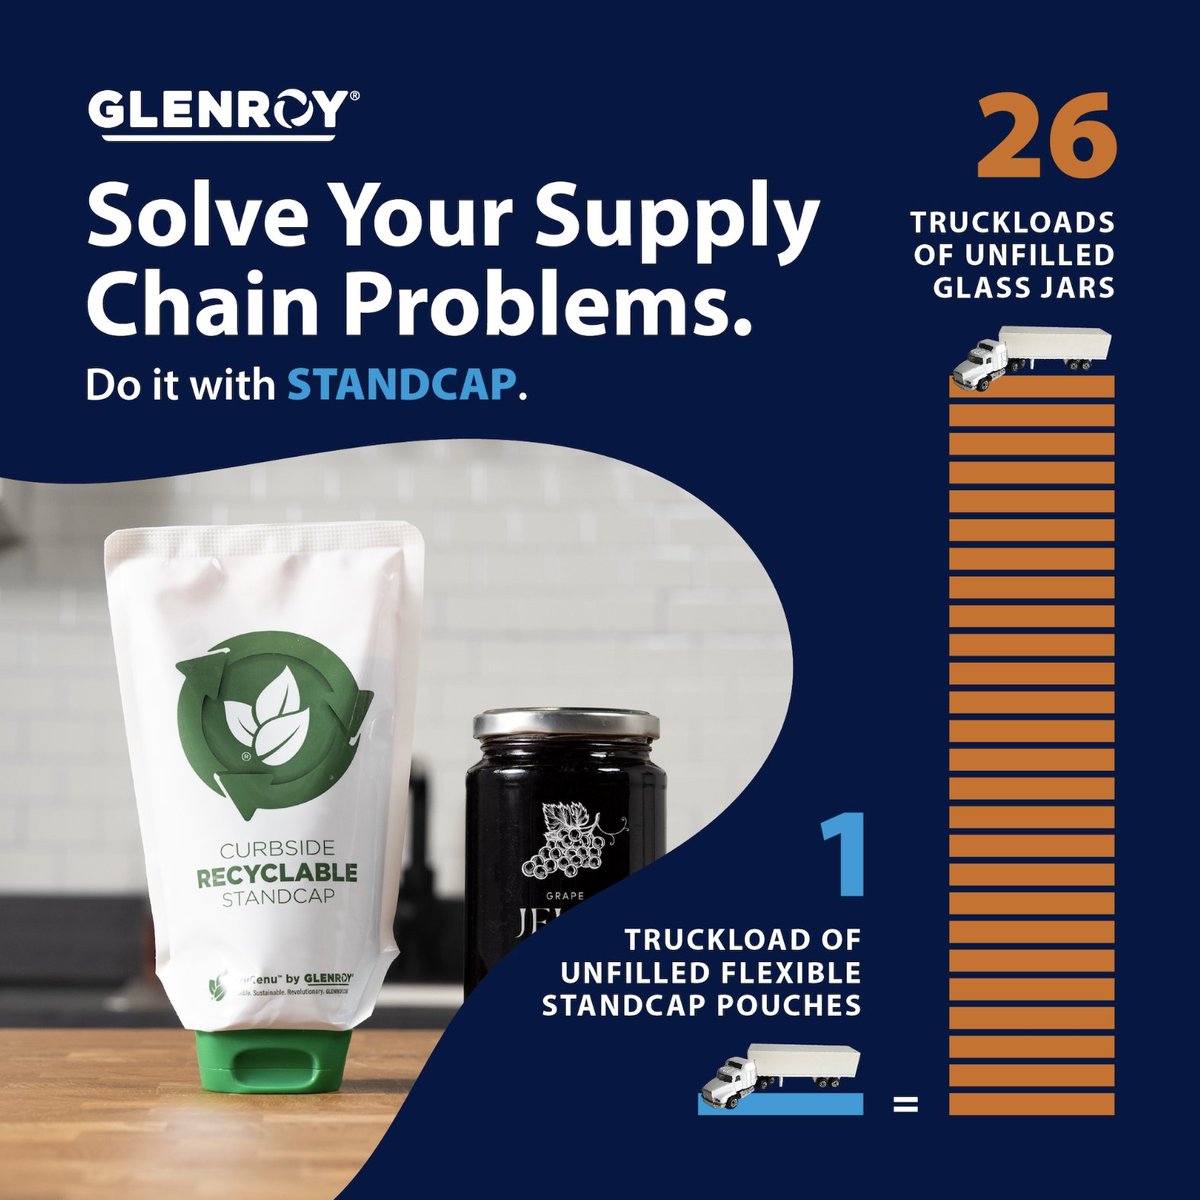 Solve your supply chain problems with recyclable #STANDCAP! ♻️

Did you know: 26 truckloads of unfilled glass jars = 1 truckload of unfilled flexible pouches? Ship more for less.

Learn more ➡️ glenroy.com/recyclable-sta…

#flexiblepackaging #recyclablepackaging #supplychain